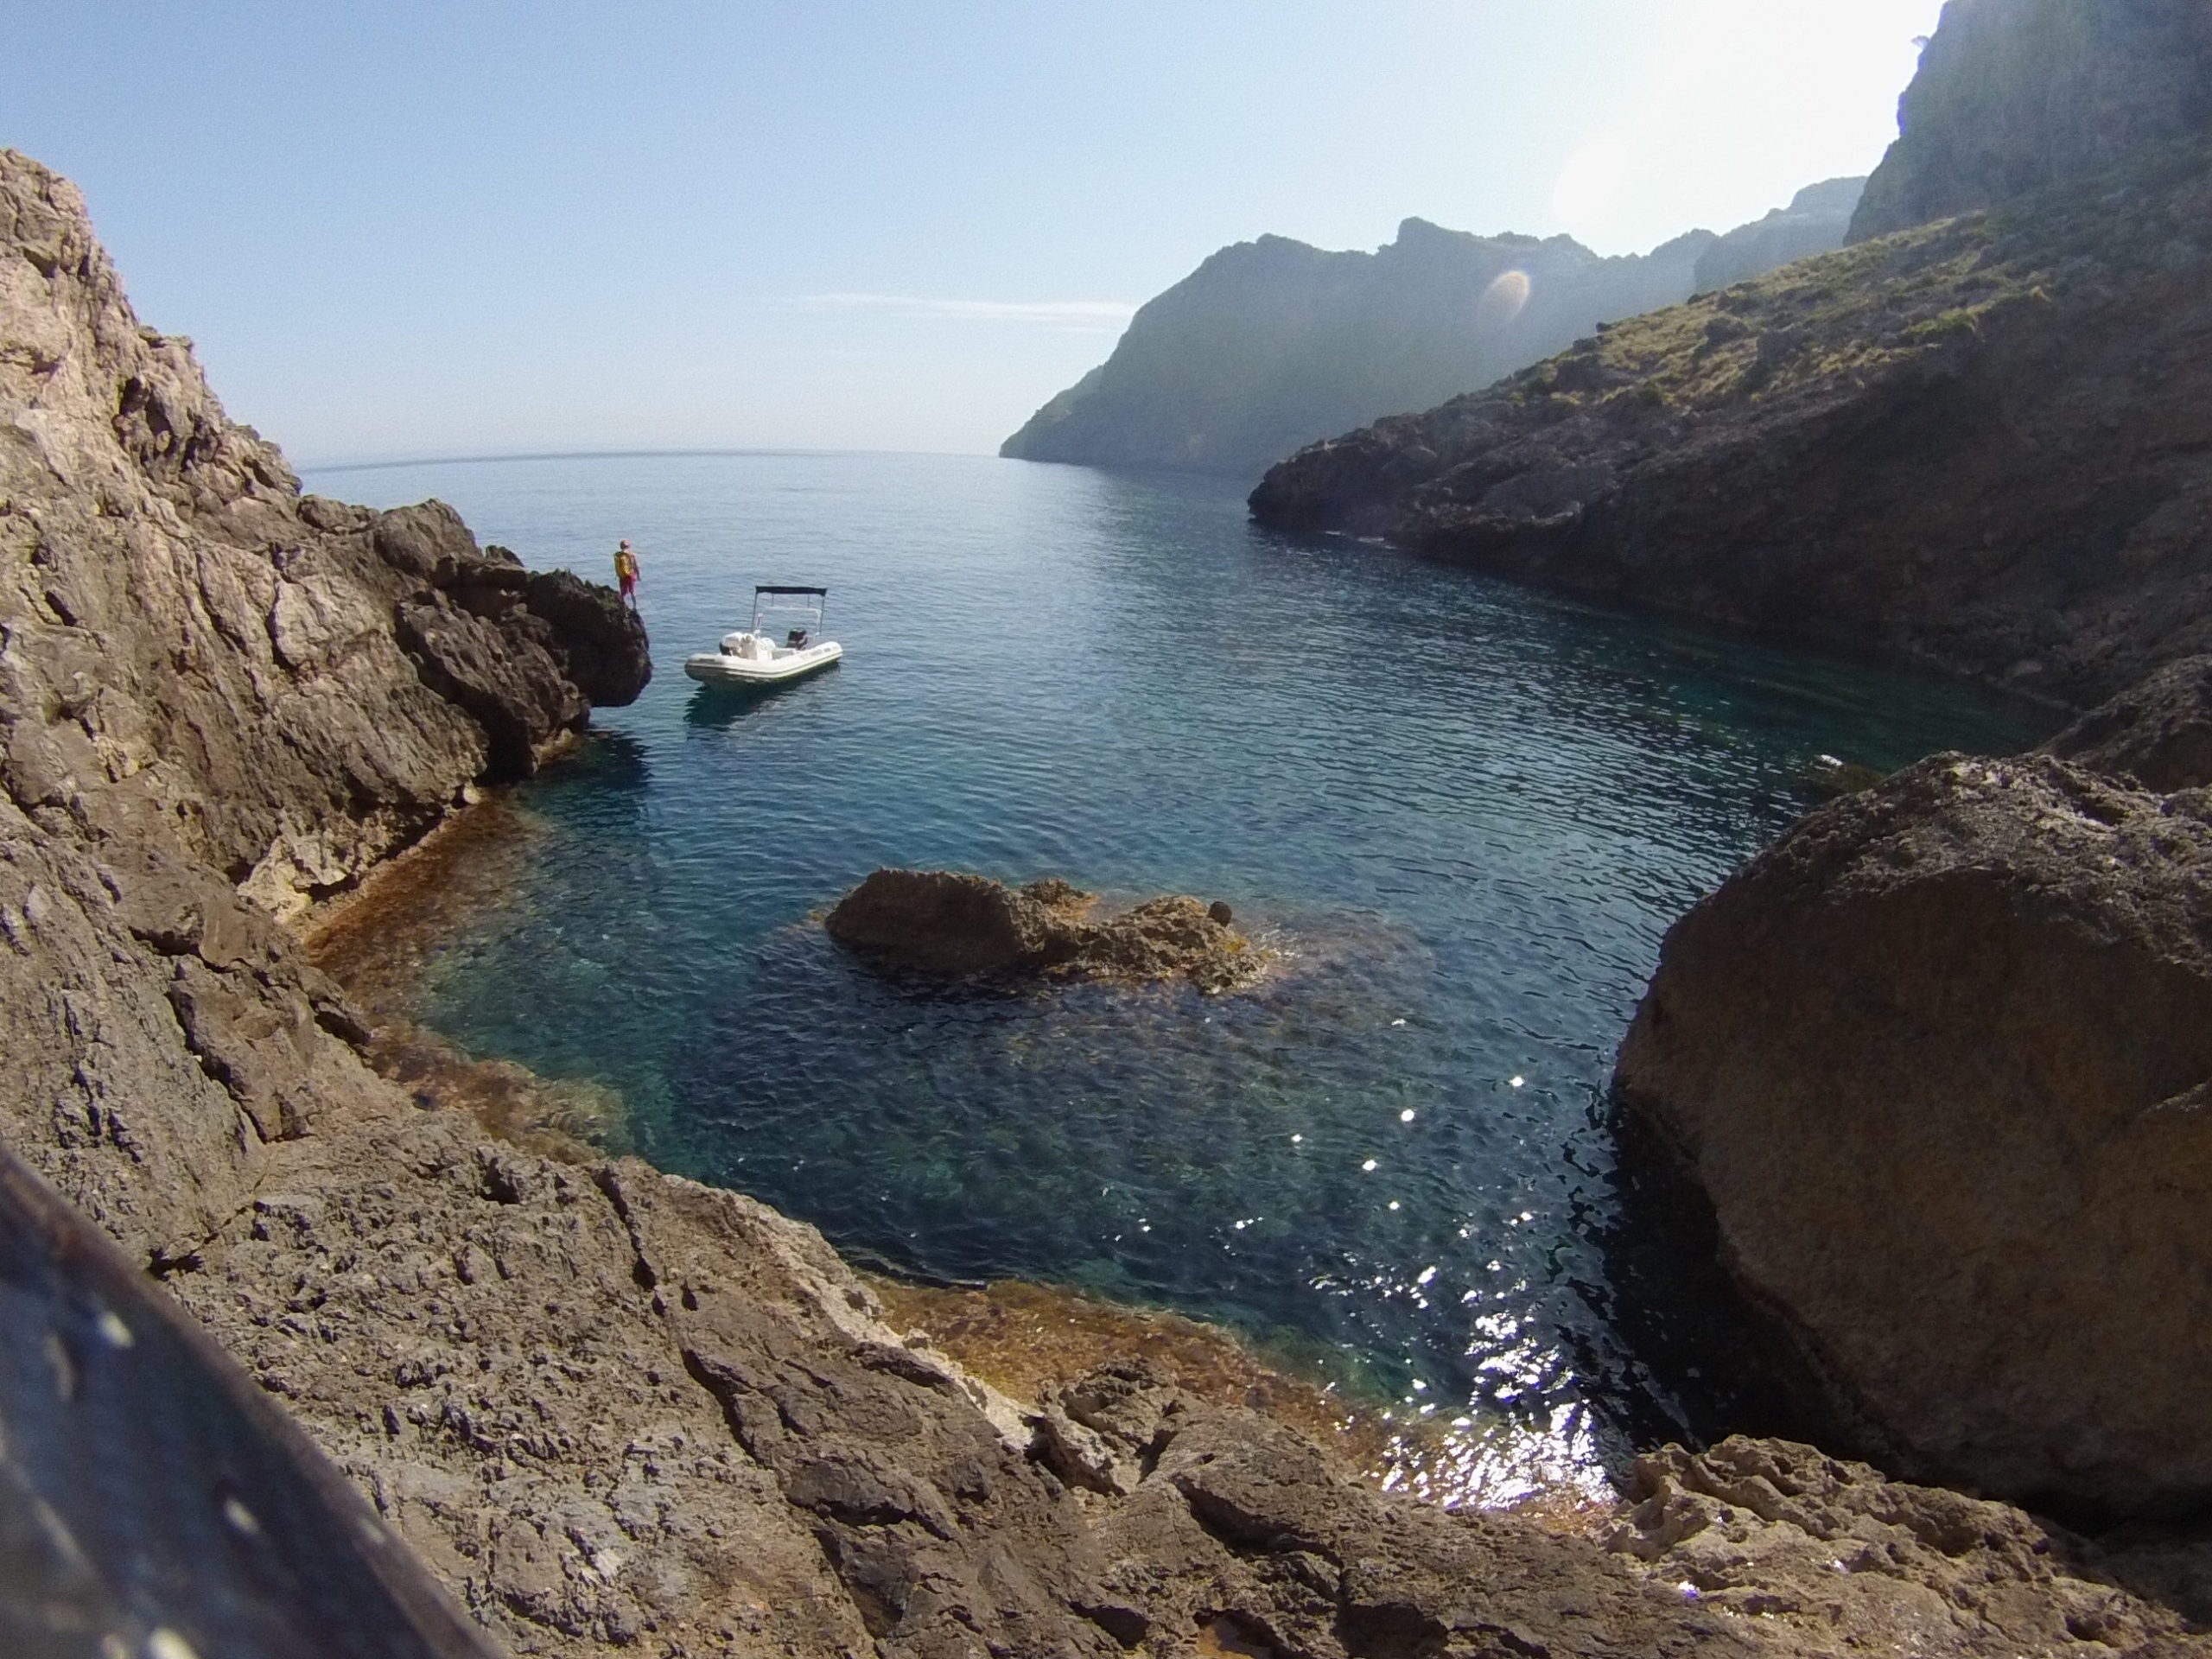 View of sea and cliffs in Majorca